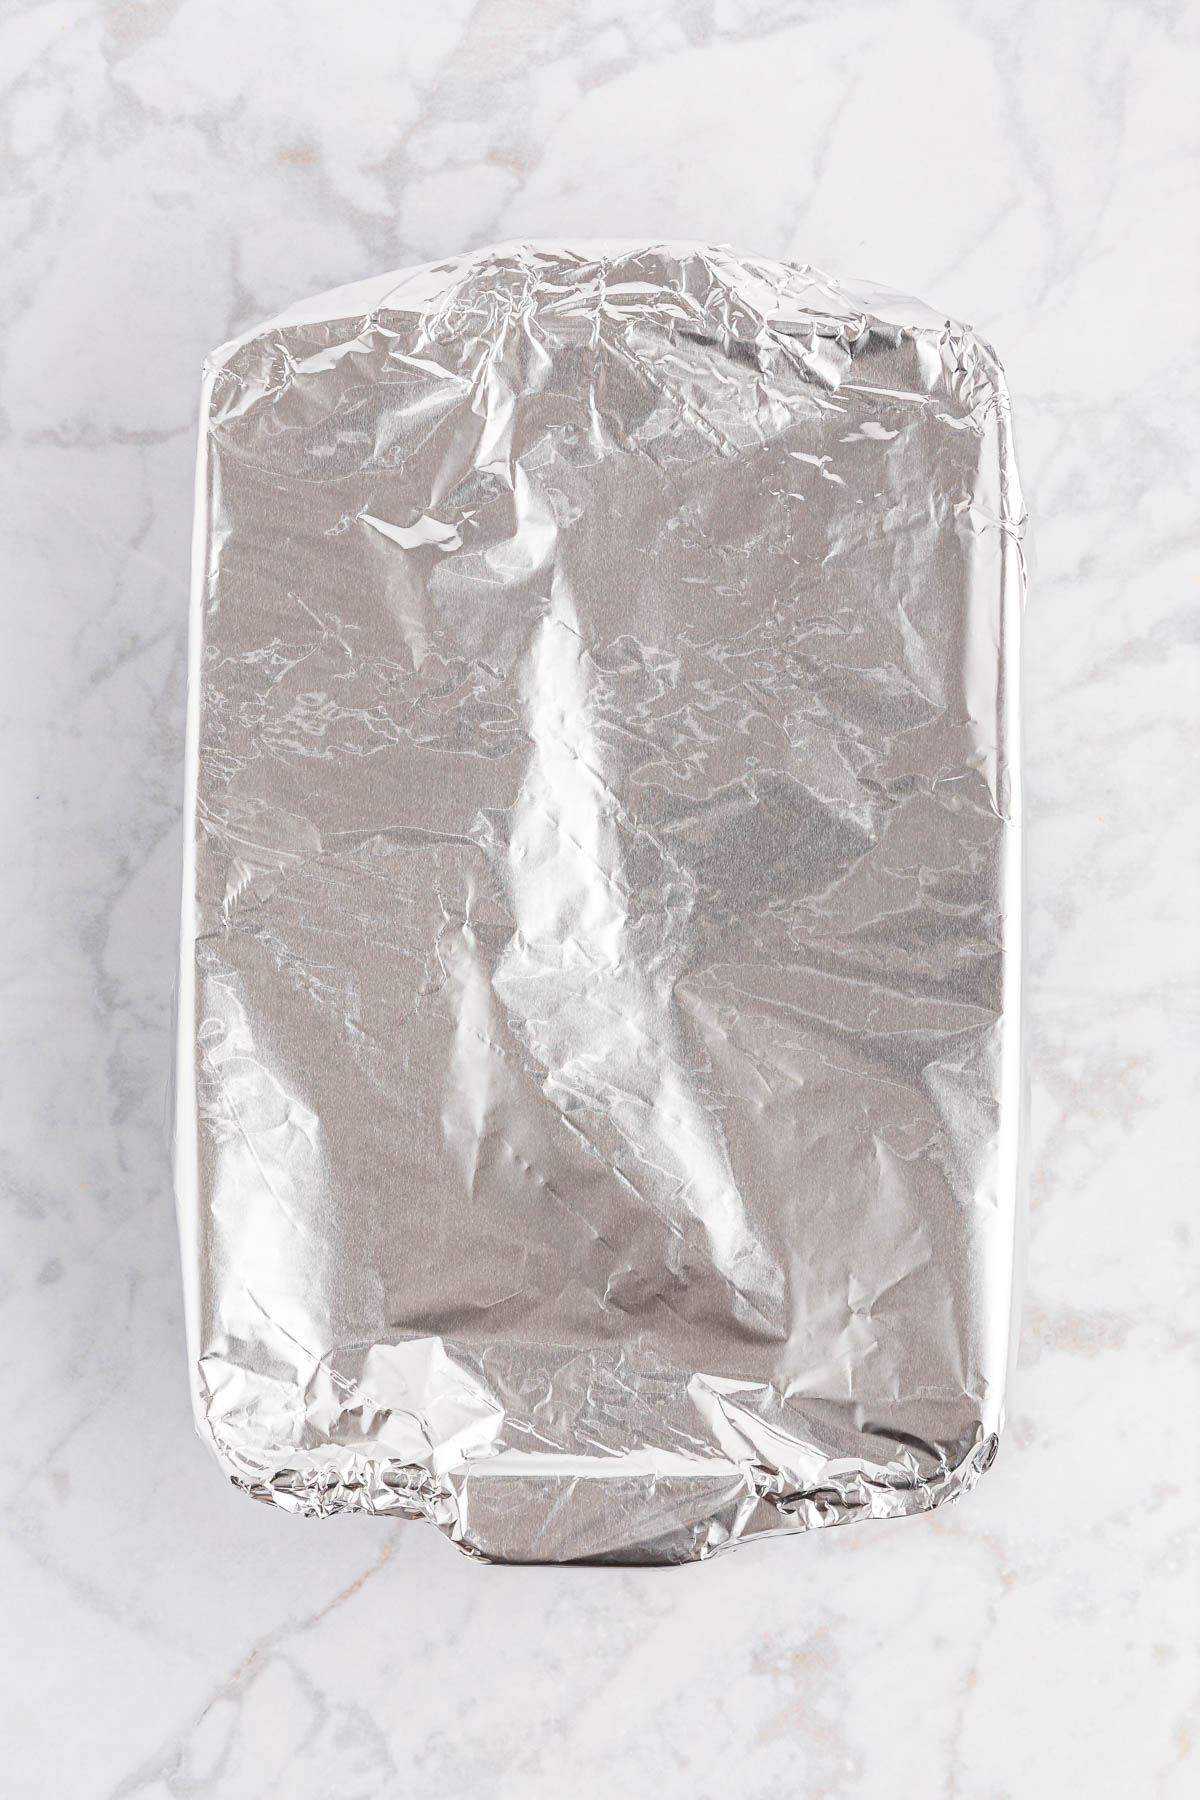 Hamburger casserole covered with foil